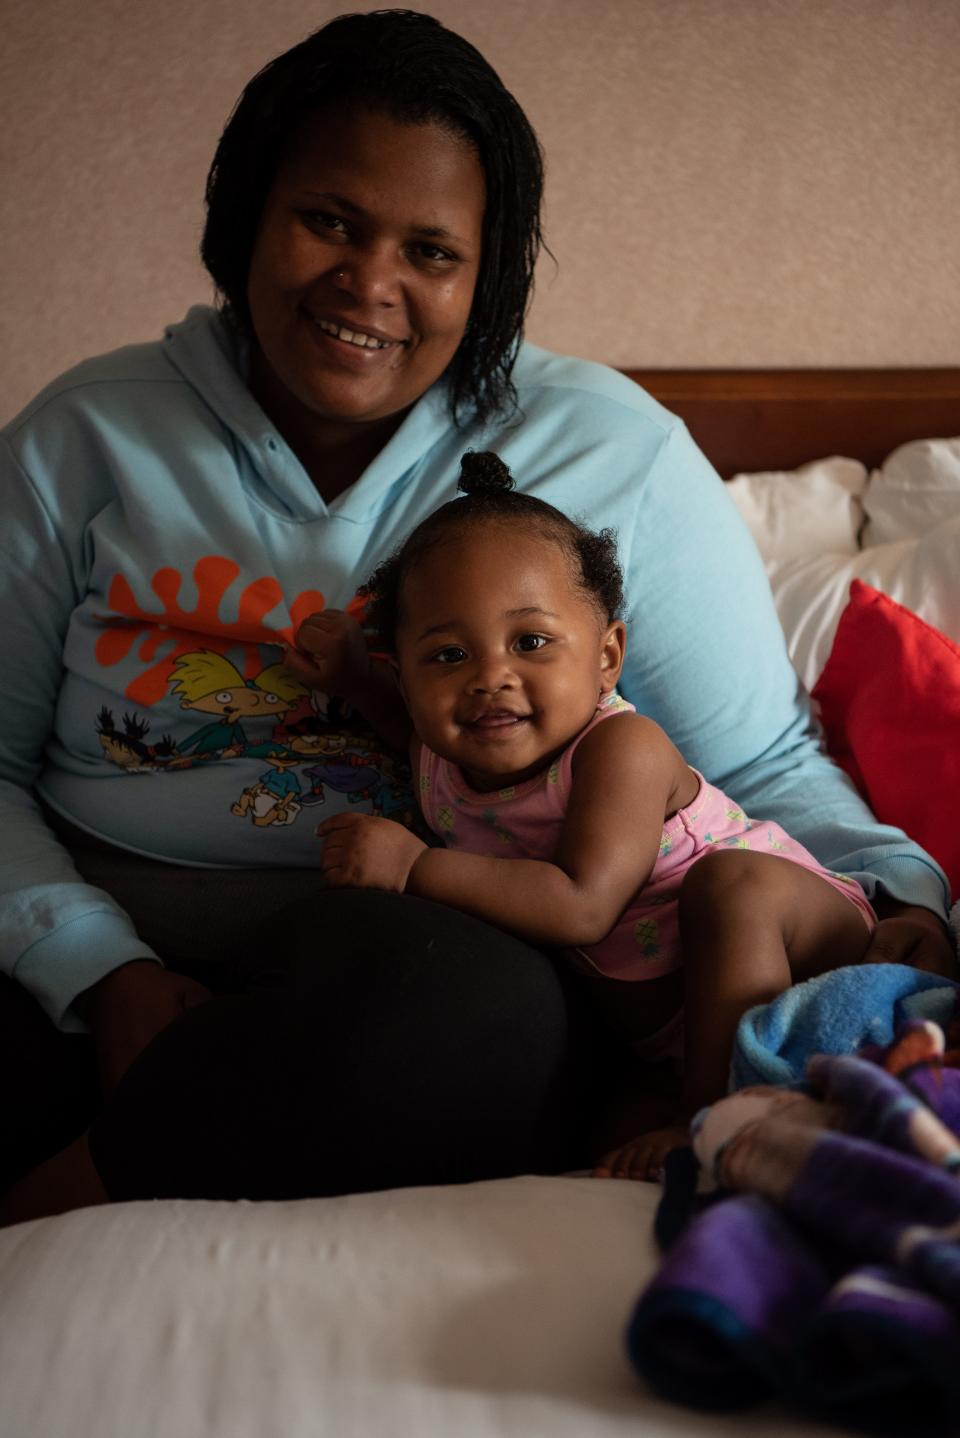 Jennie Spencer was awarded a rapid rehousing voucher but has not been able to find a place to rent in her more than 8 month search. She and her one year old daughter (name withheld) recently moved out of a homeless shelter to stay temporarily in a hotel. Spencer and her daughter moments after settling into their hotel room.